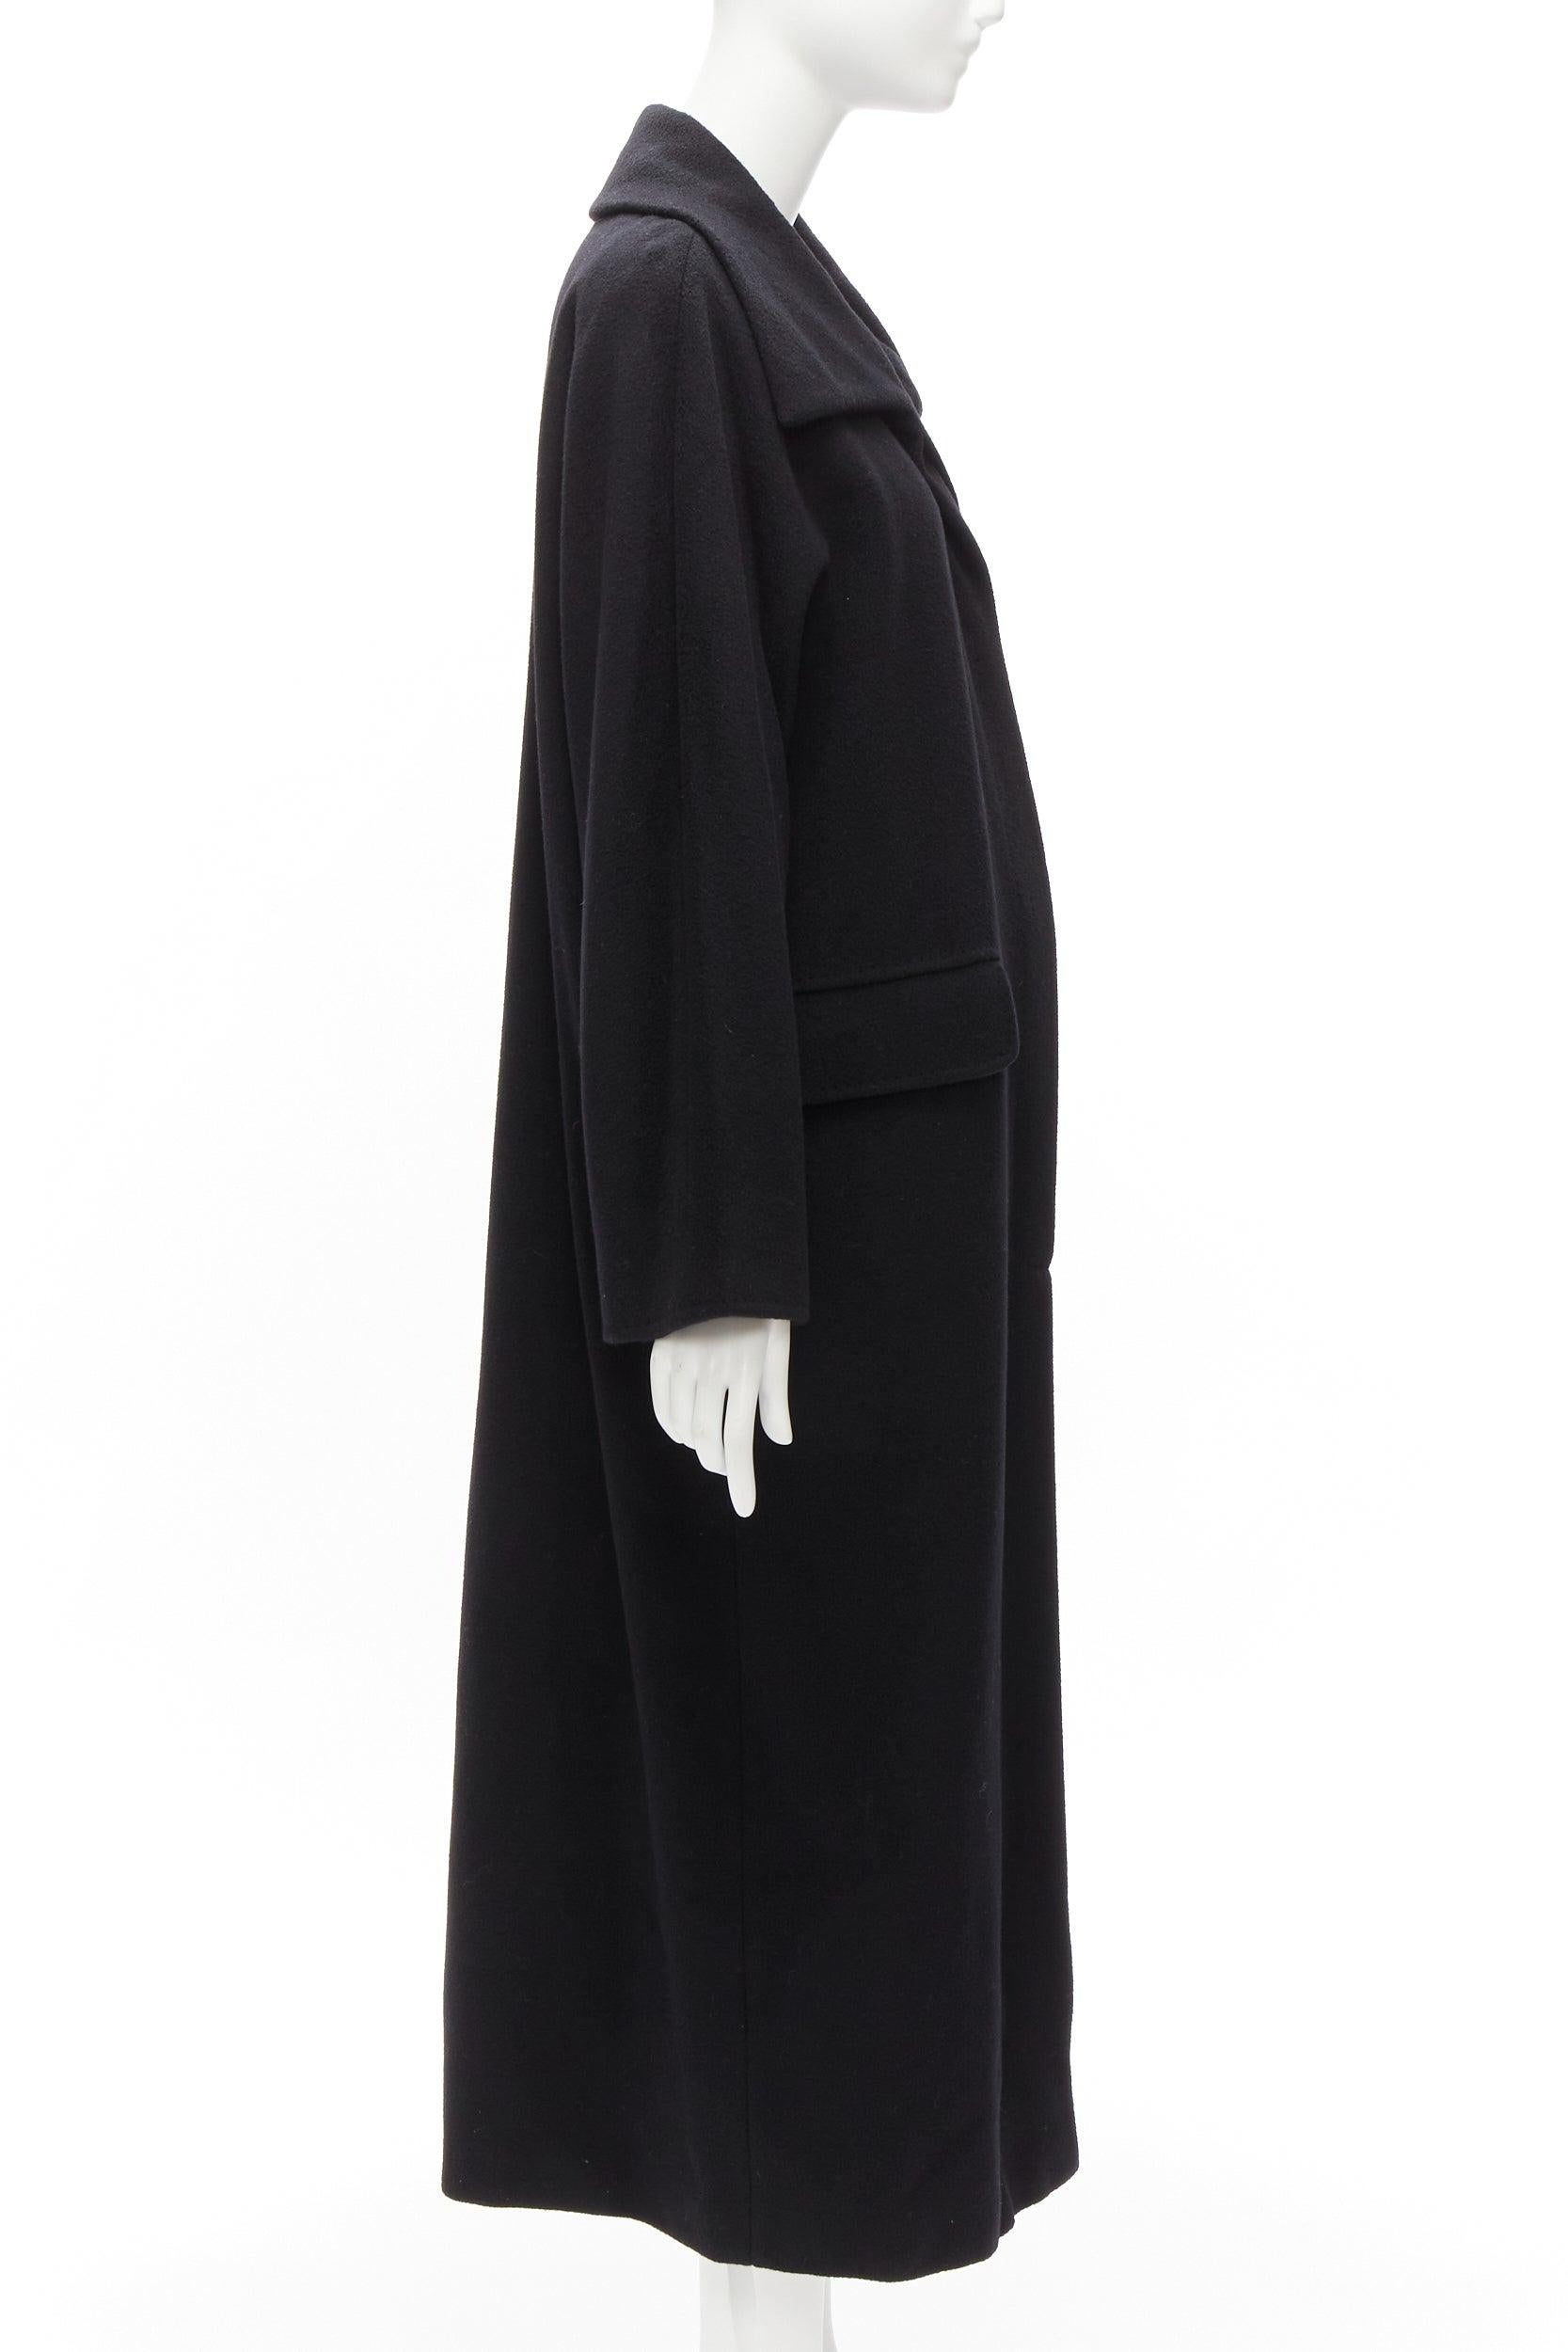 MAX MARA black virgin wool cashmere wide collar long coat IT42 M In Excellent Condition For Sale In Hong Kong, NT